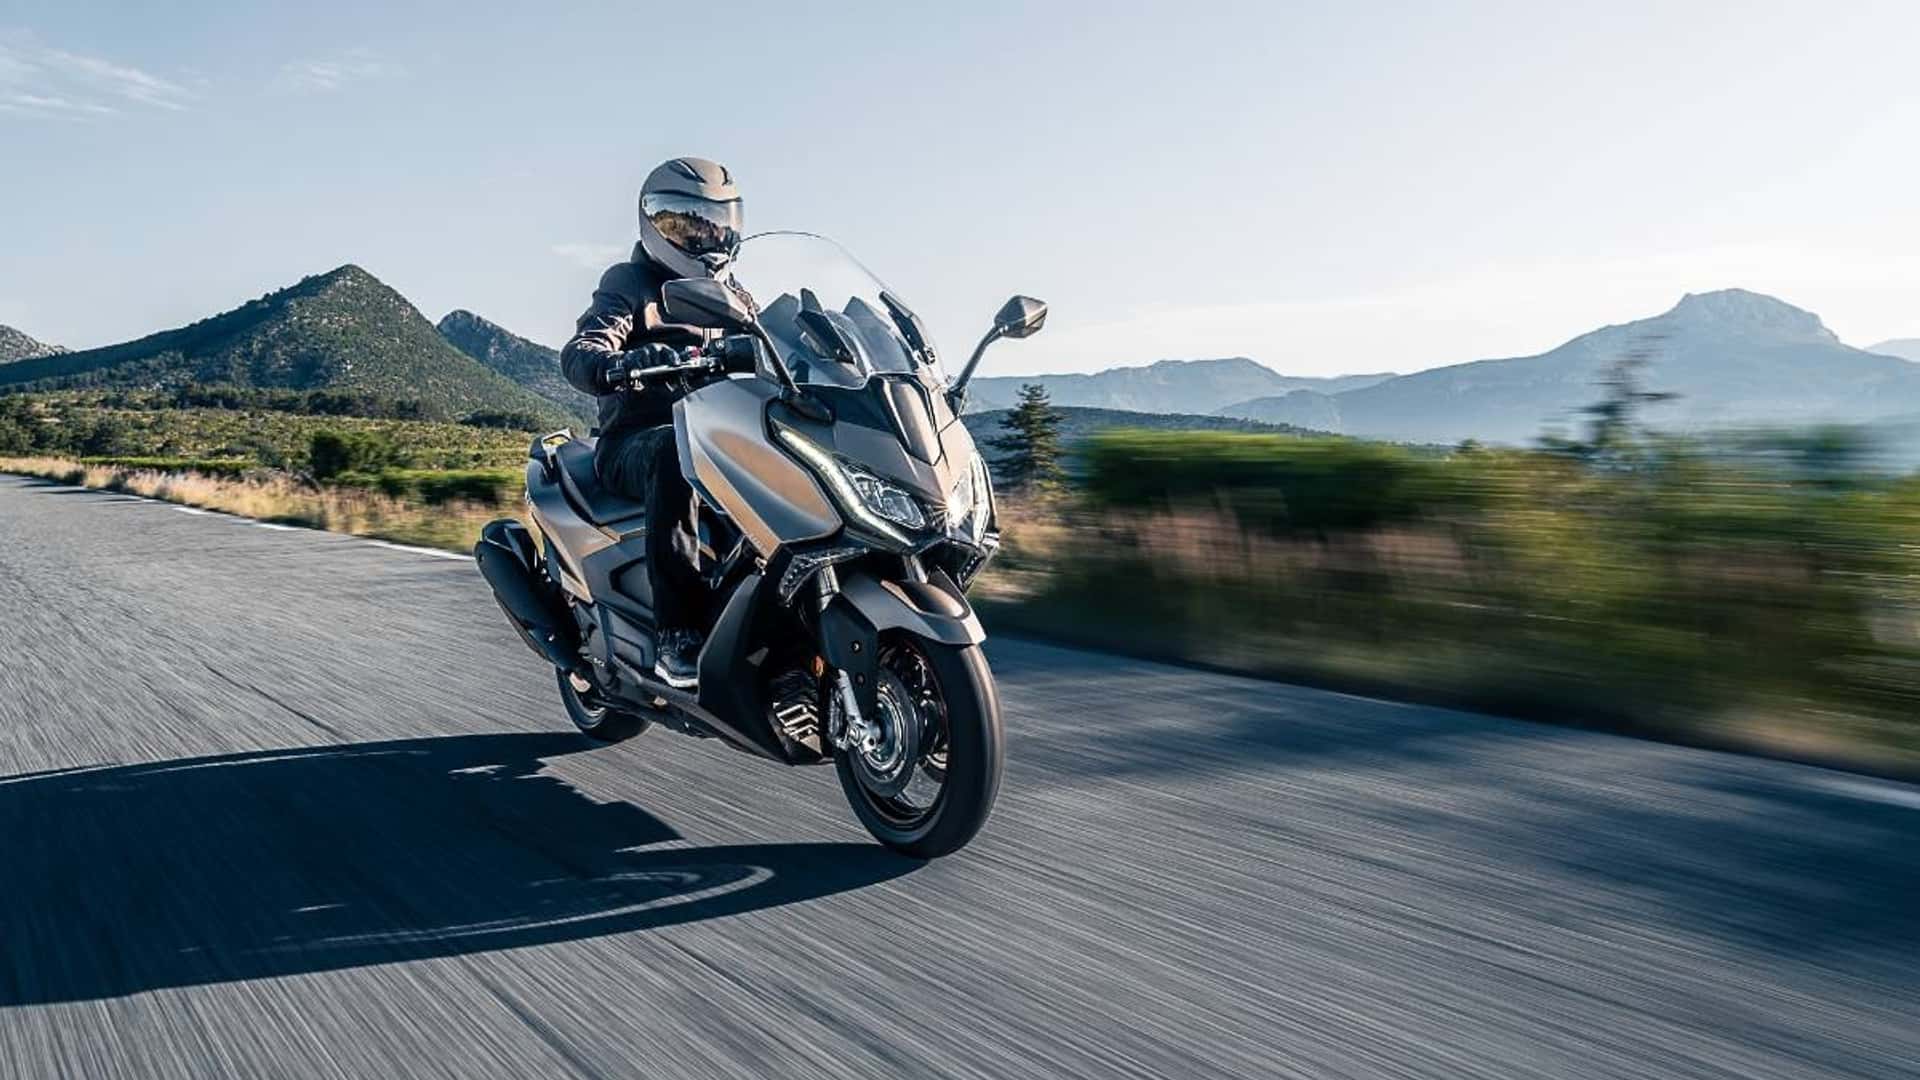 KYMCO AK 550 2023 gets a new look with the Premium version, taking on the Yamaha TMAX KYMCO AK 550 Premium 2023 (3).jpg